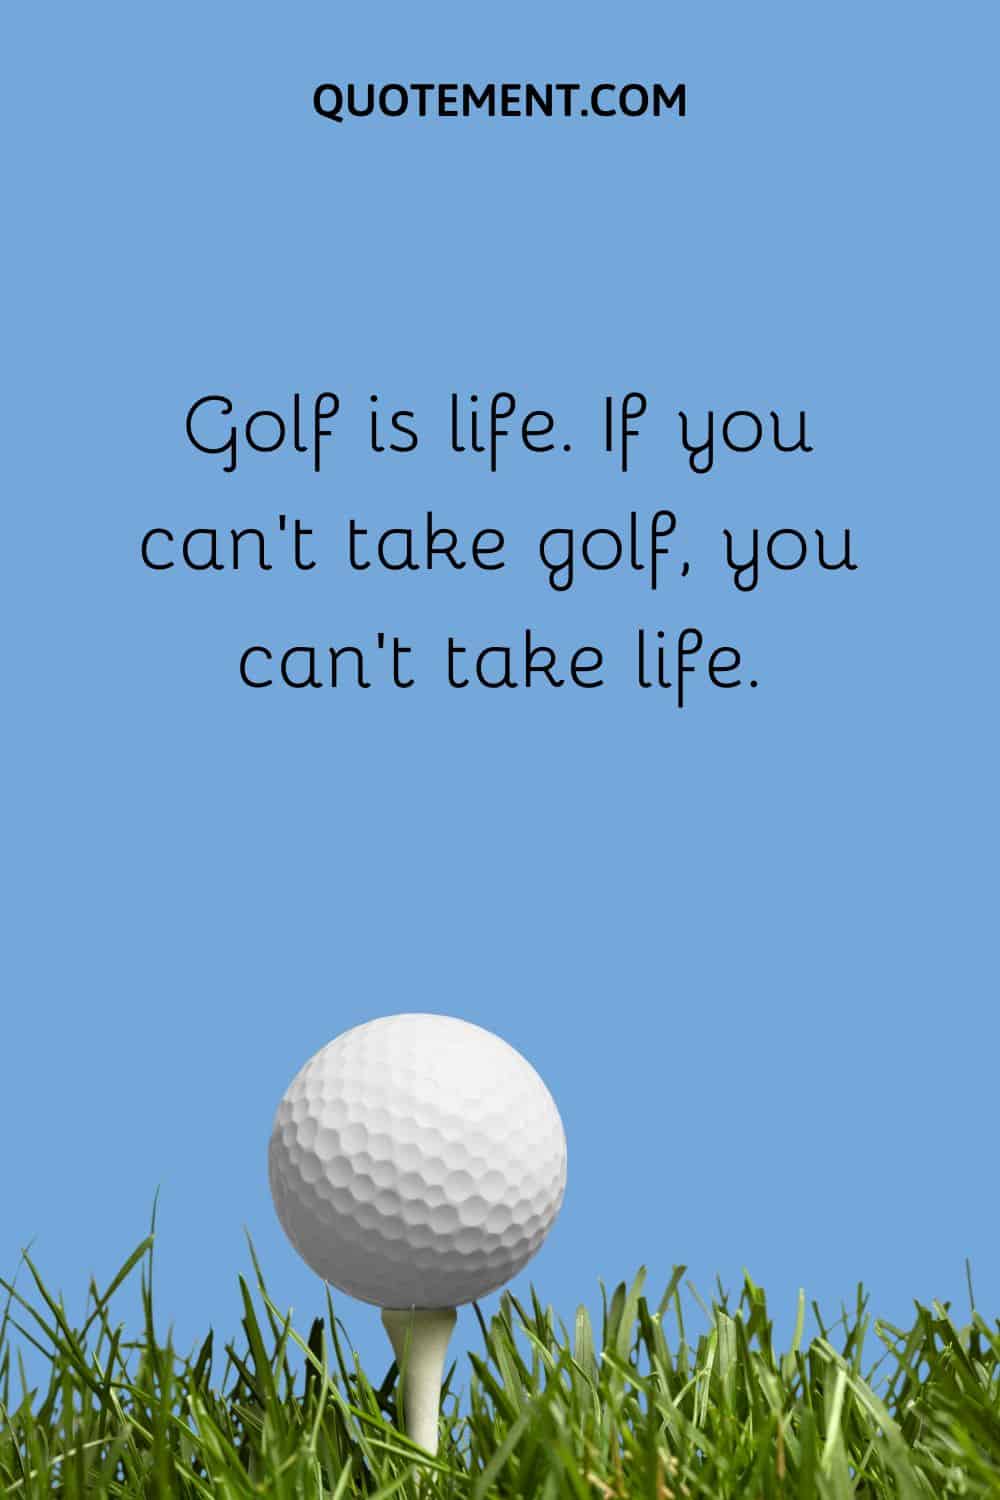 Golf is life. If you can’t take golf, you can’t take life.